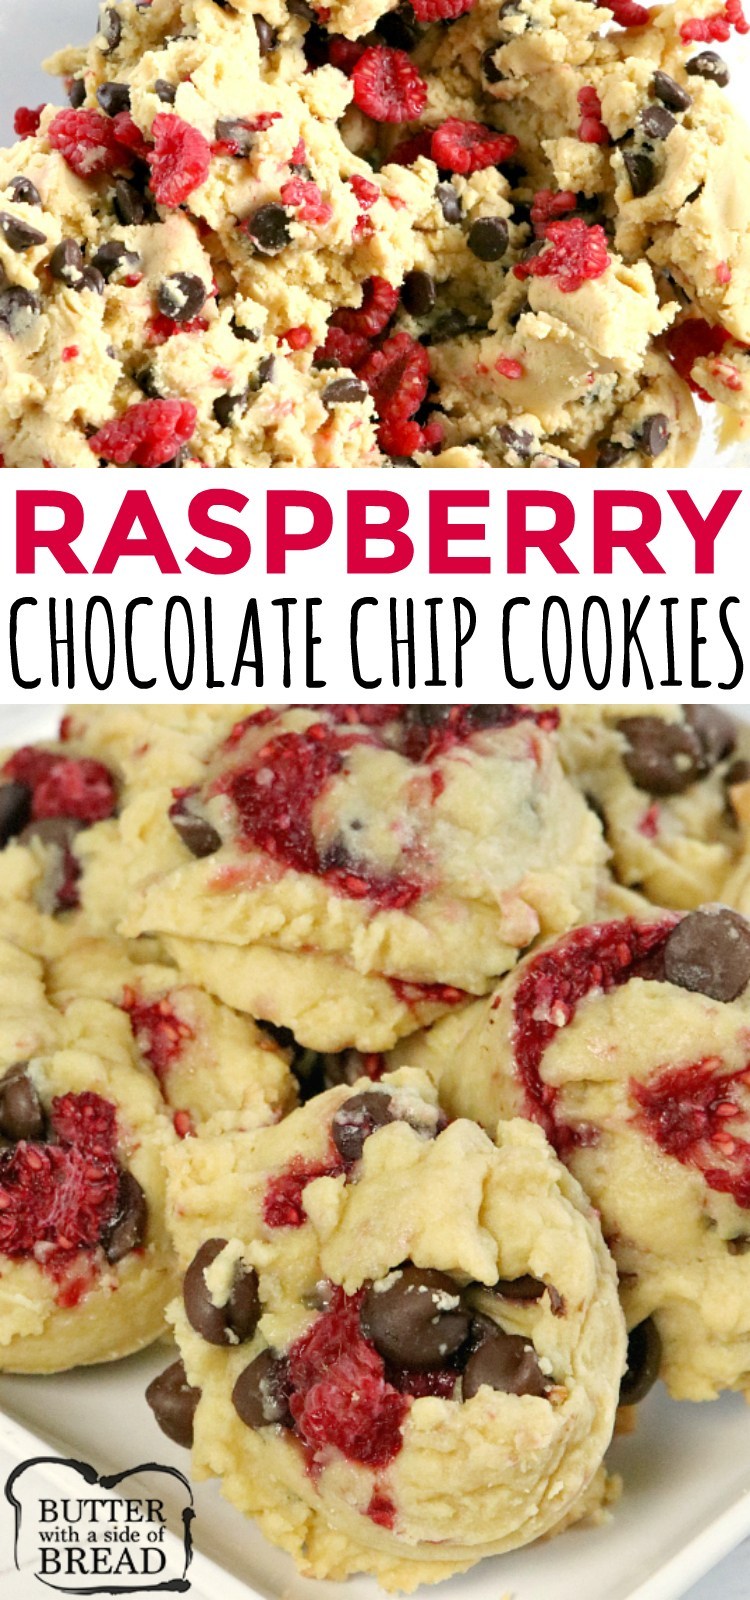 Raspberry Chocolate Chip Cookies are absolutely amazing! Adding fresh raspberries to a classic chocolate chip cookie recipe makes a delicious difference!